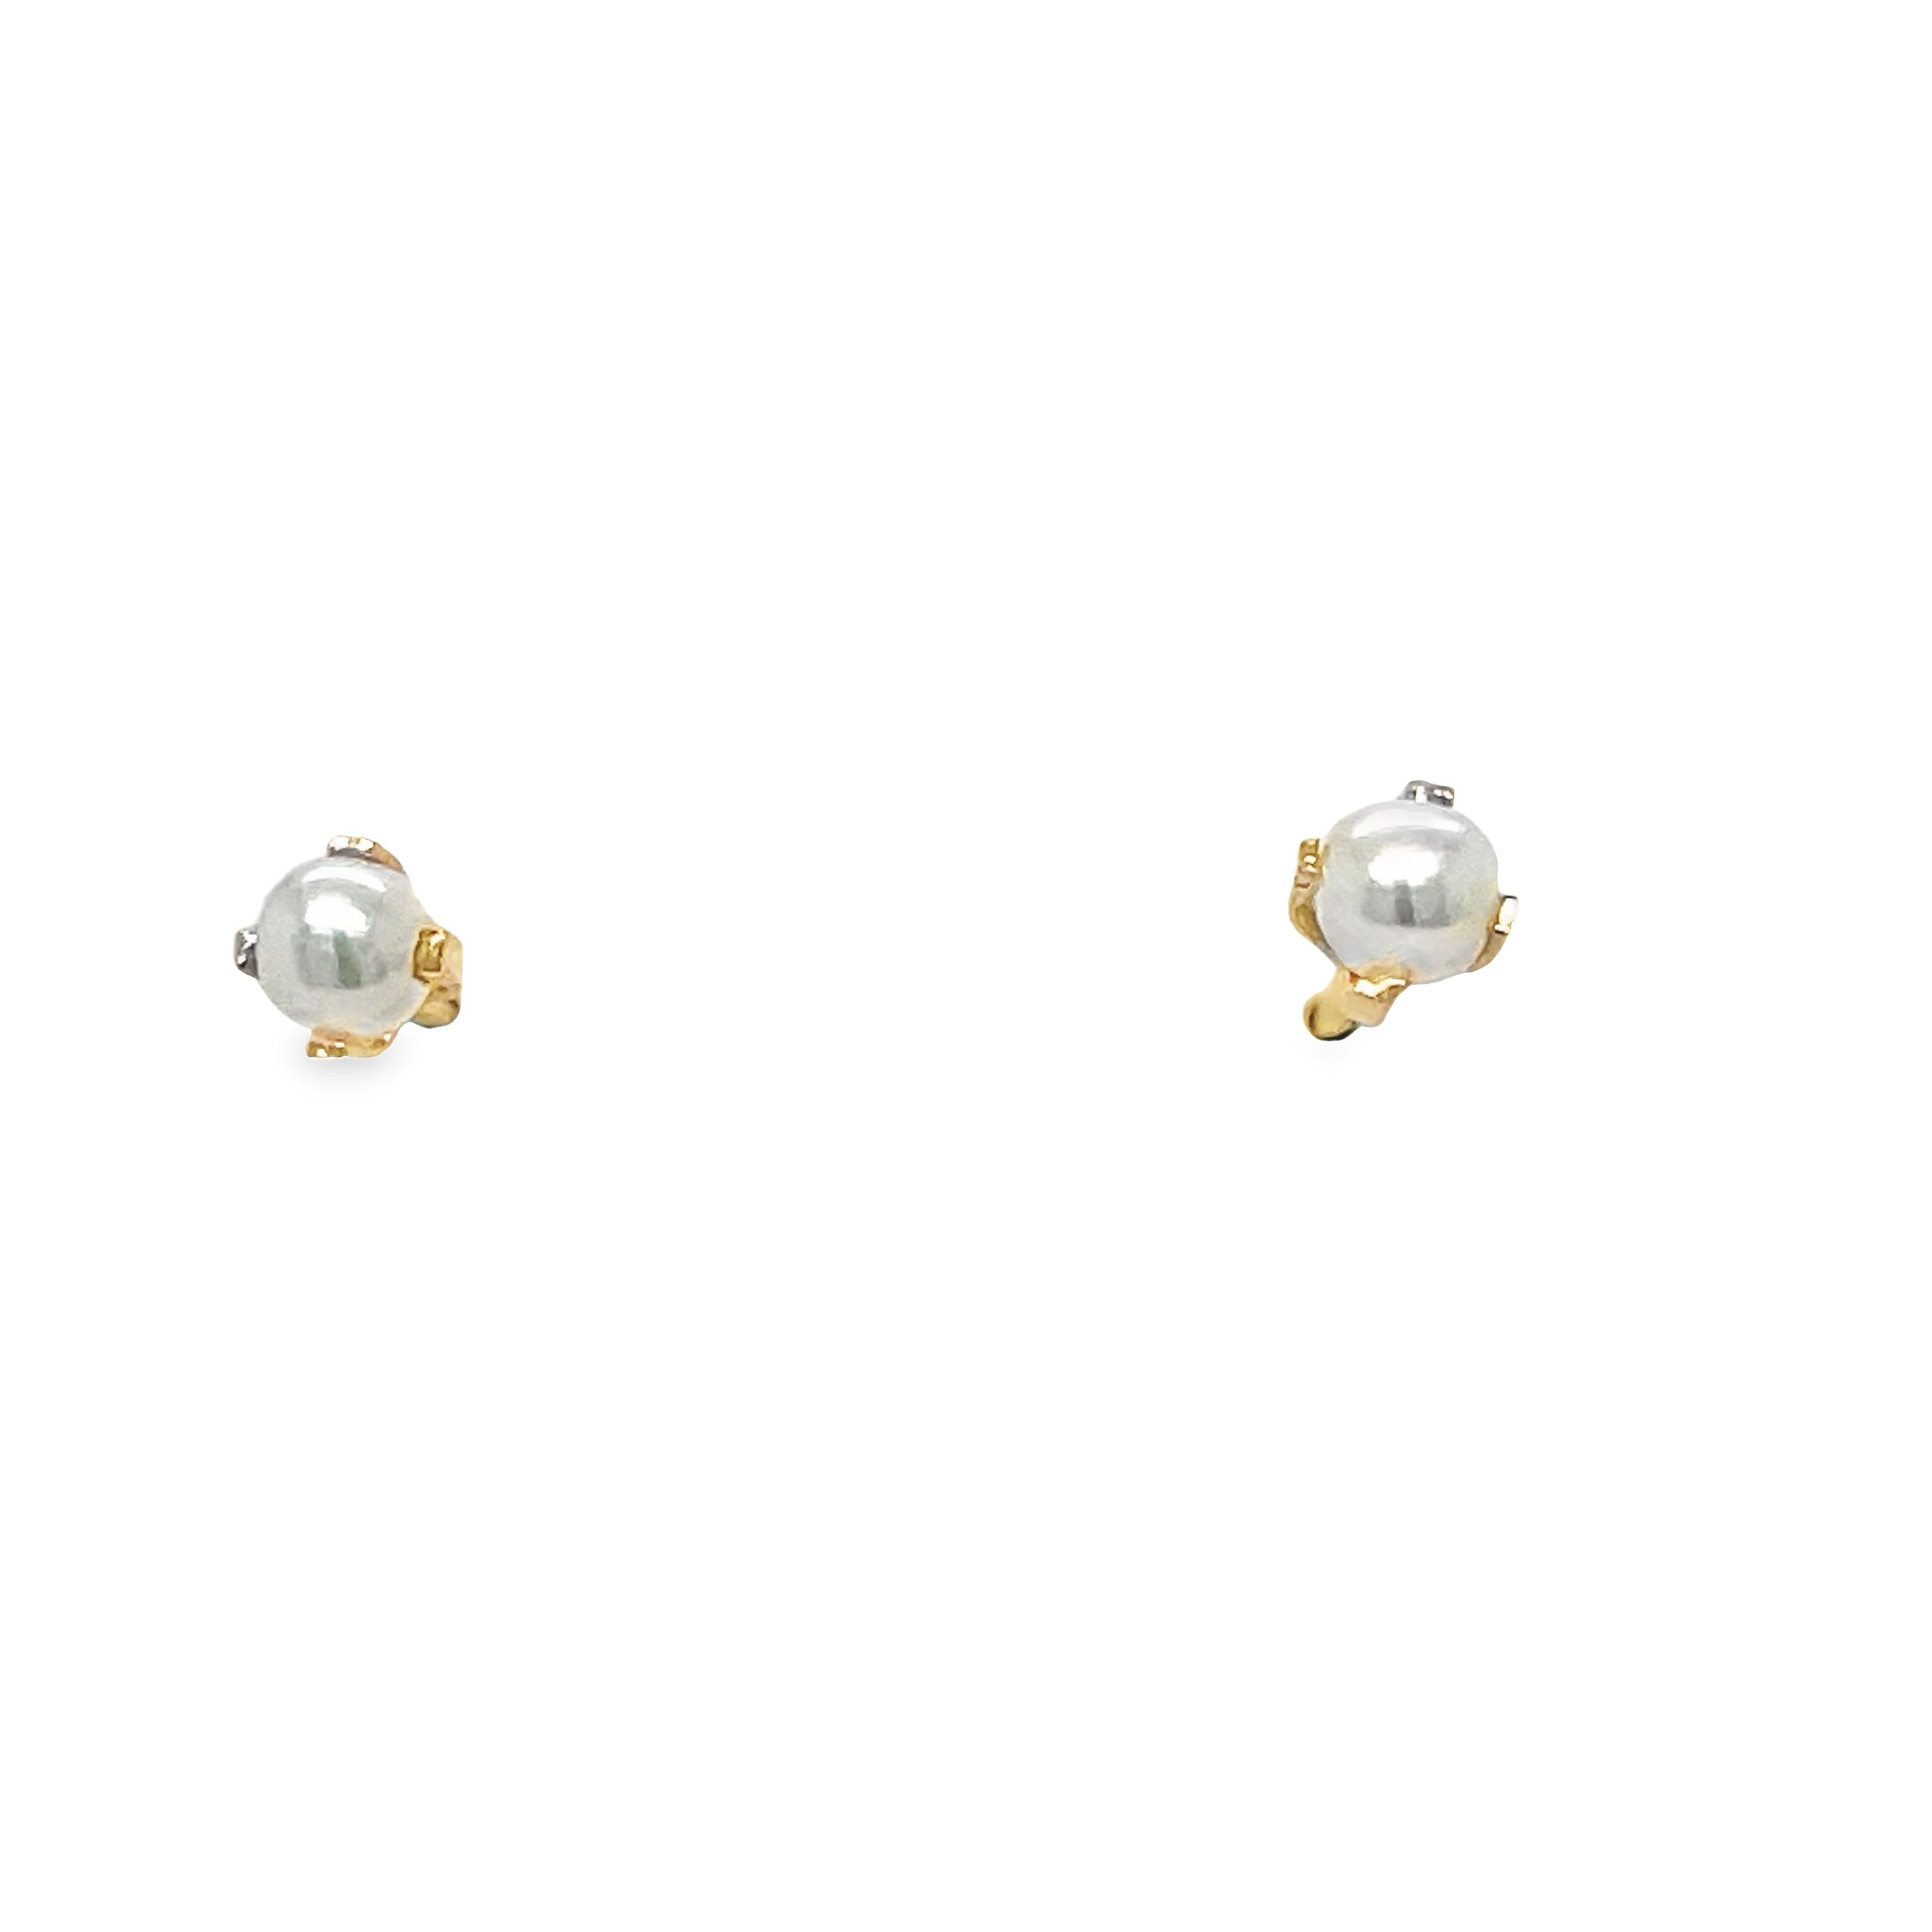 Expertly crafted with 14k yellow gold, these tiny baby earrings feature a delicate pearl stud for a touch of elegance. With secure baby backs, these earrings are perfect for your precious little one. Add a classic and timeless piece to your baby's jewelry collection.